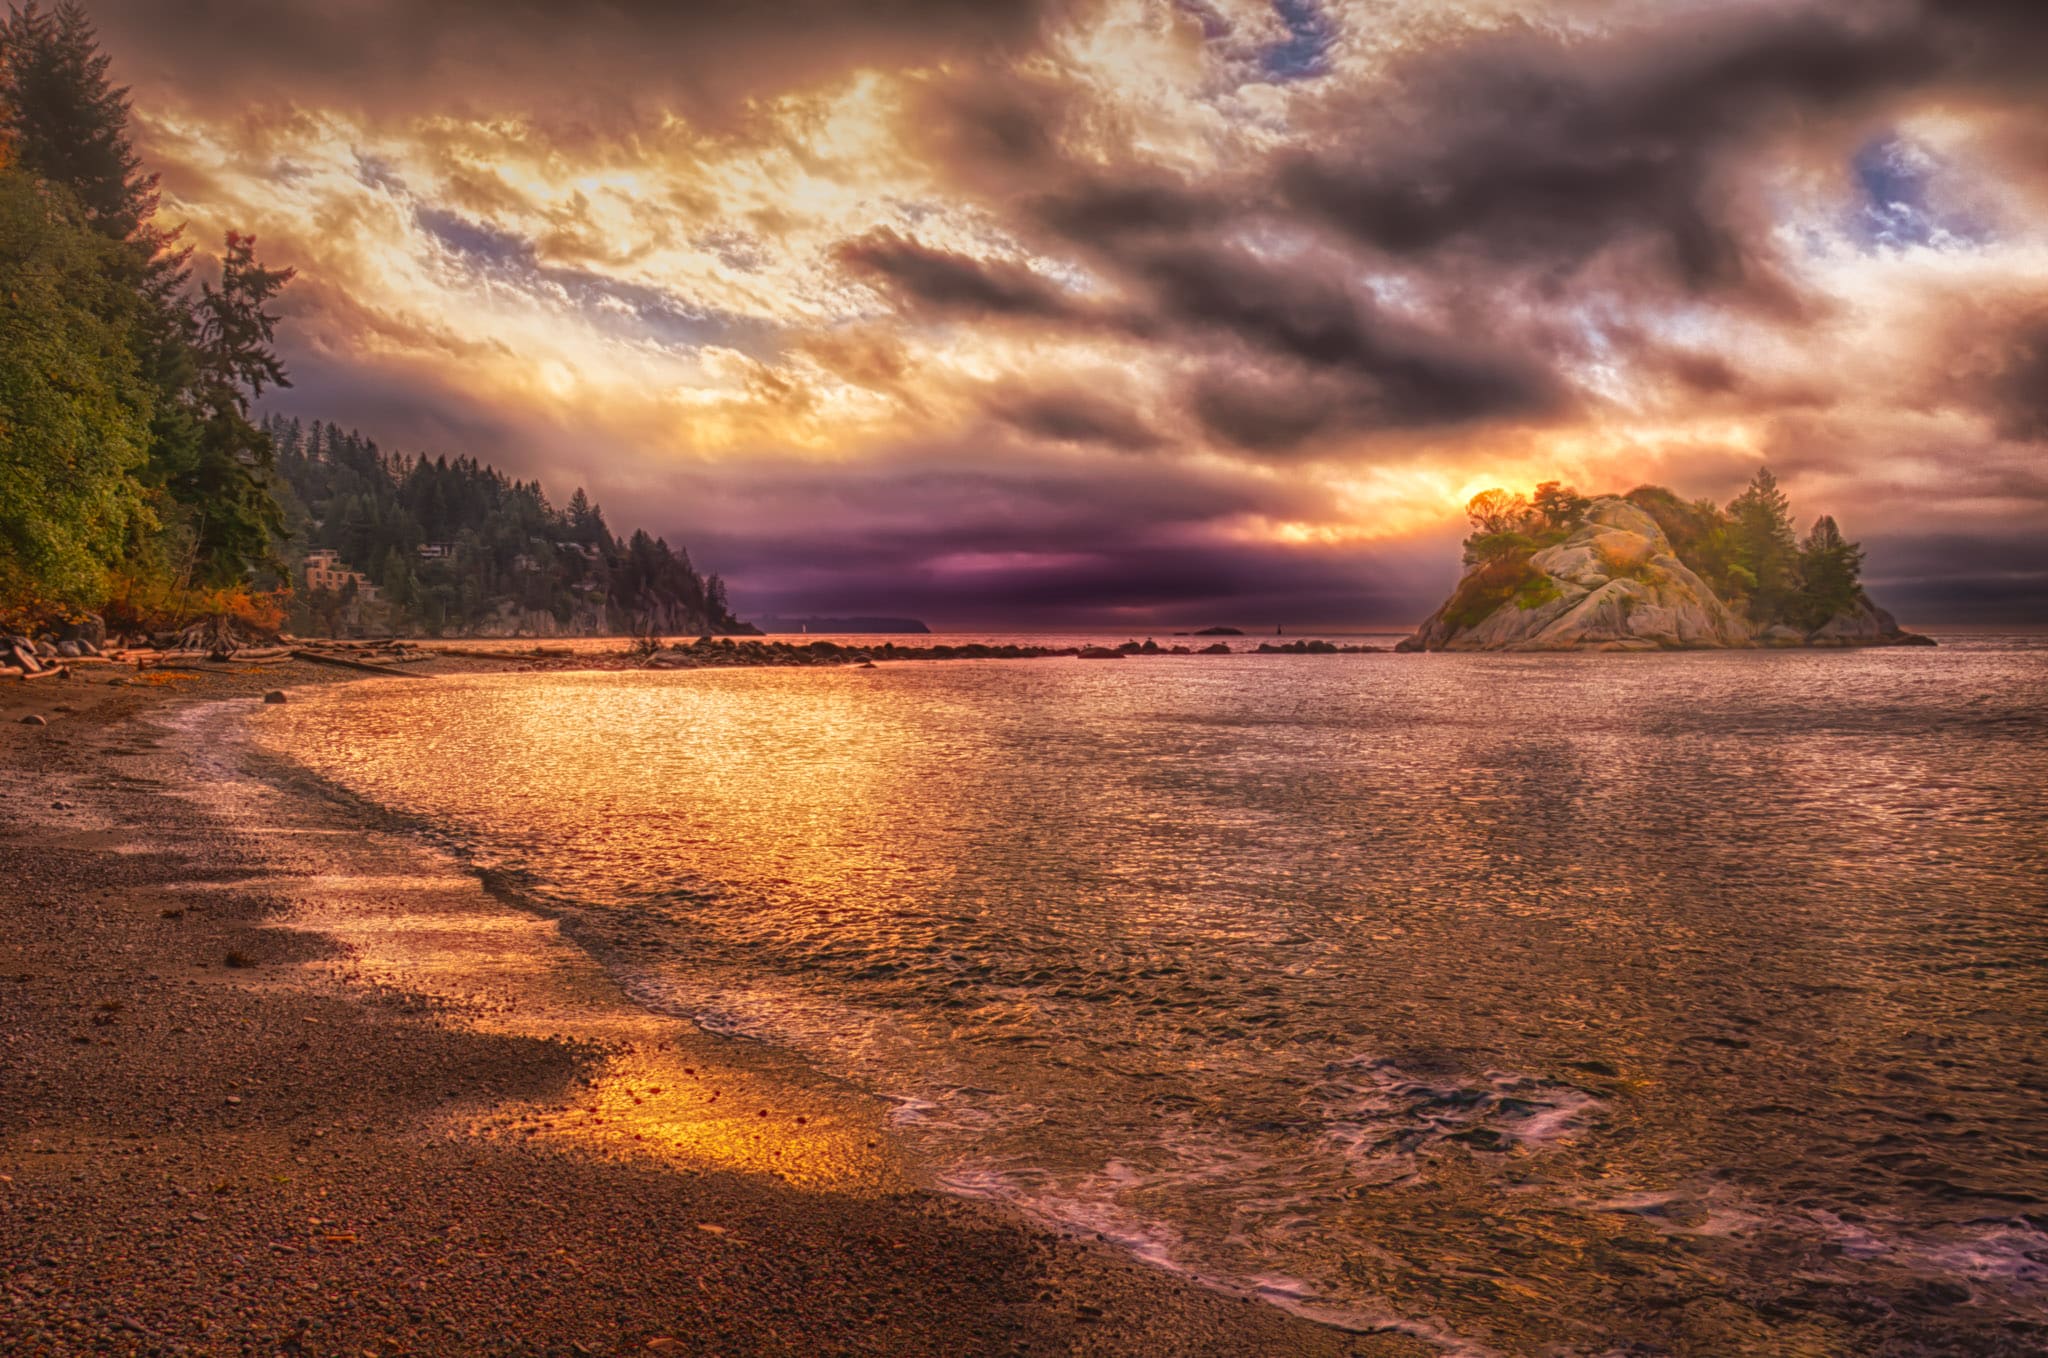 A view at sunset along the shore of Whytecliff Park with Bowyer Island, in West Vancouver, British Columbia.